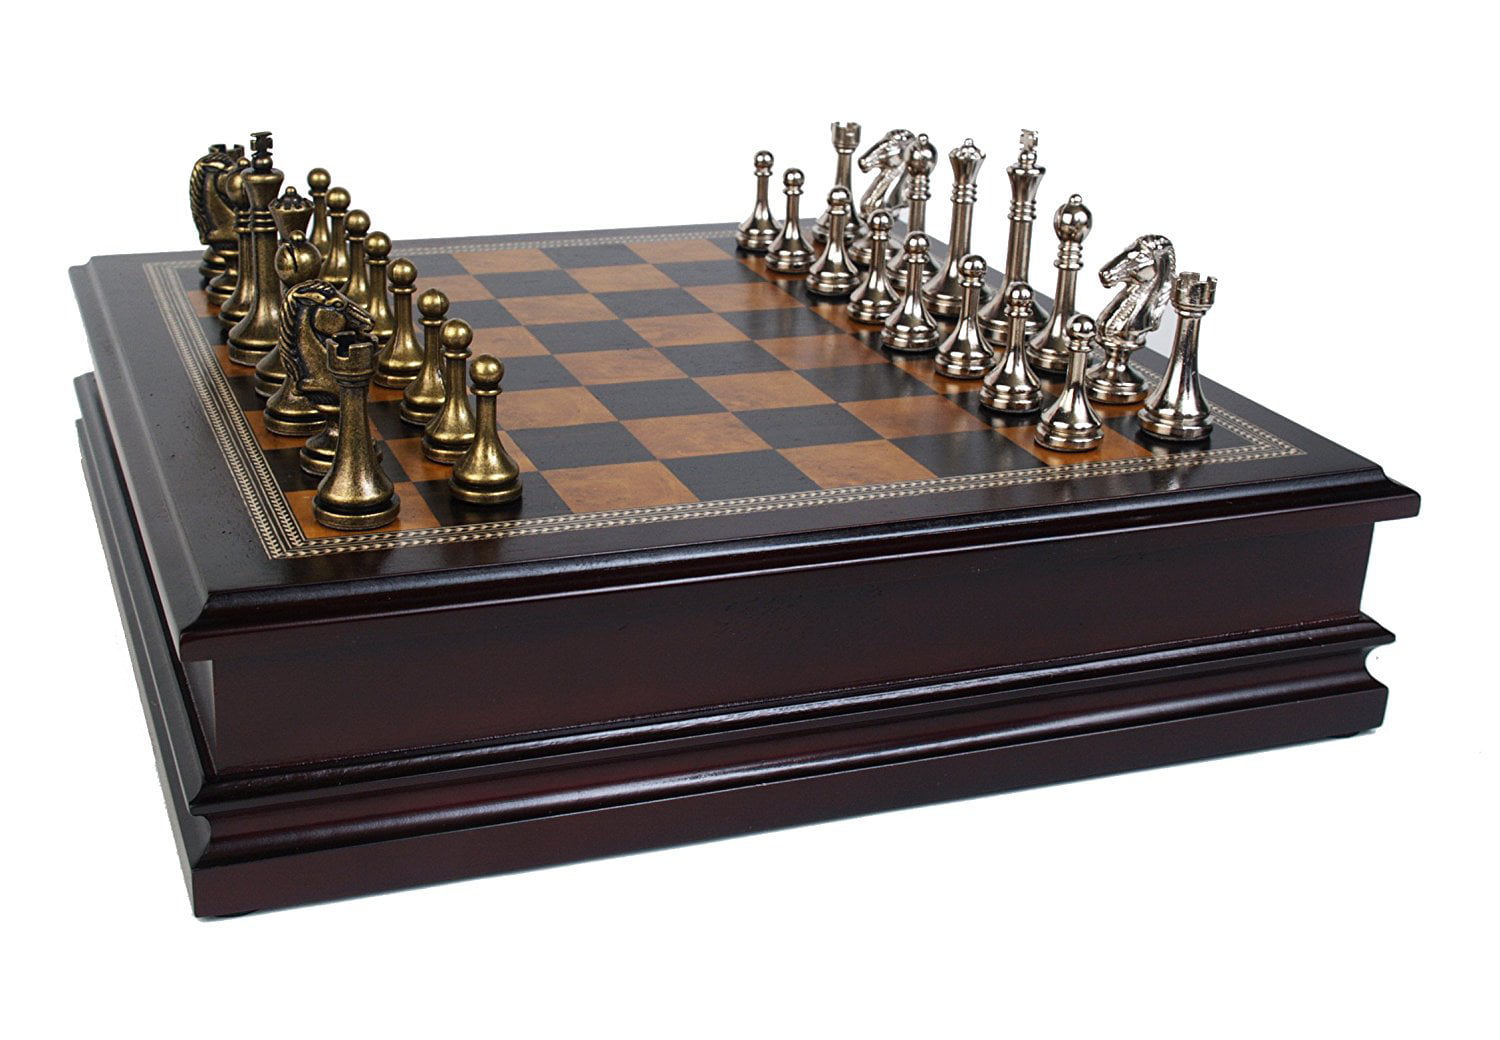 Chess Board Game Set Wood Wooden Inlaid Lift Up Storage METAL Pieces 12 Inch NEW 